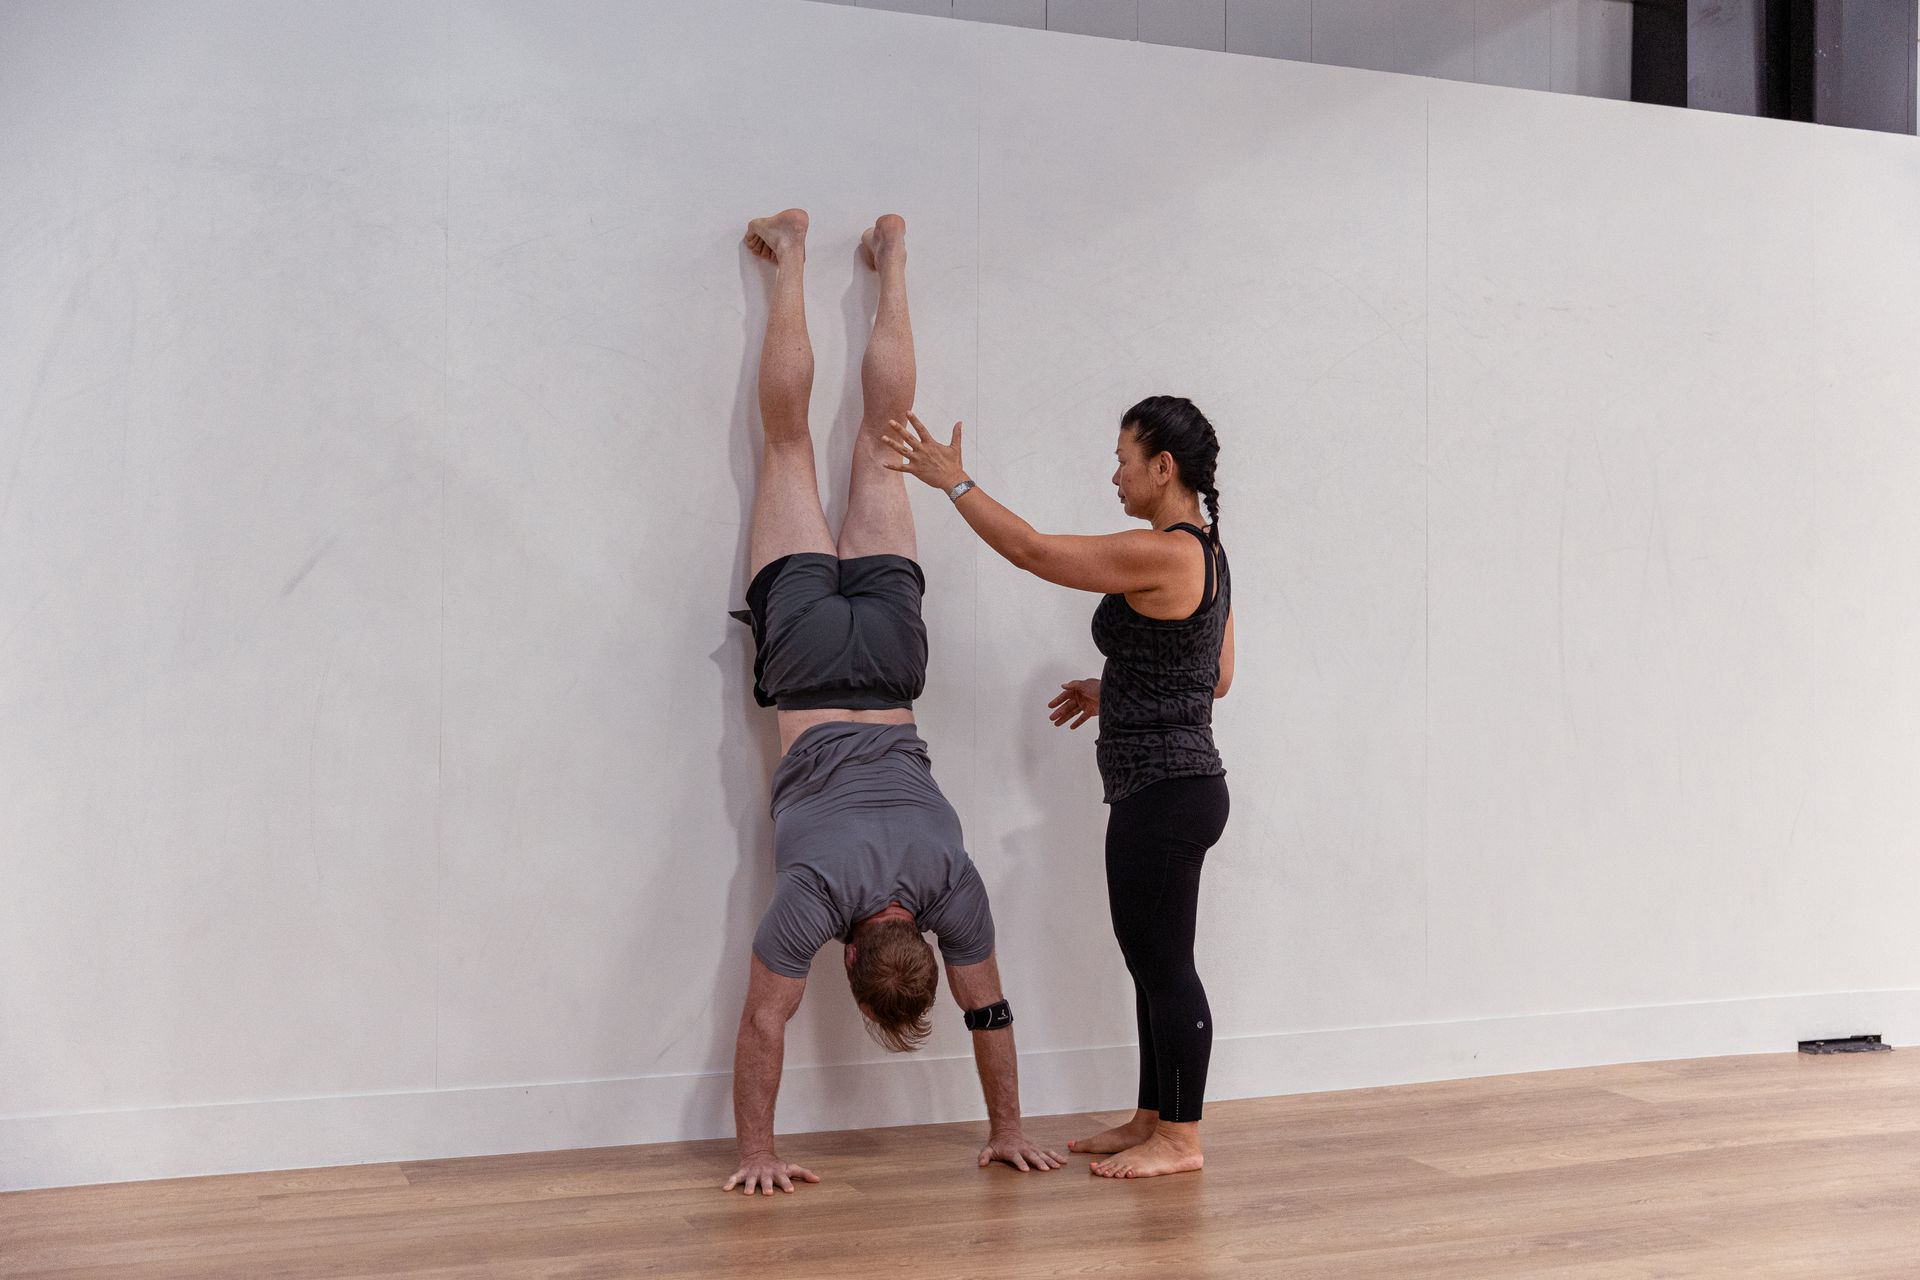 Image of a girl helping a guy doing a handstand